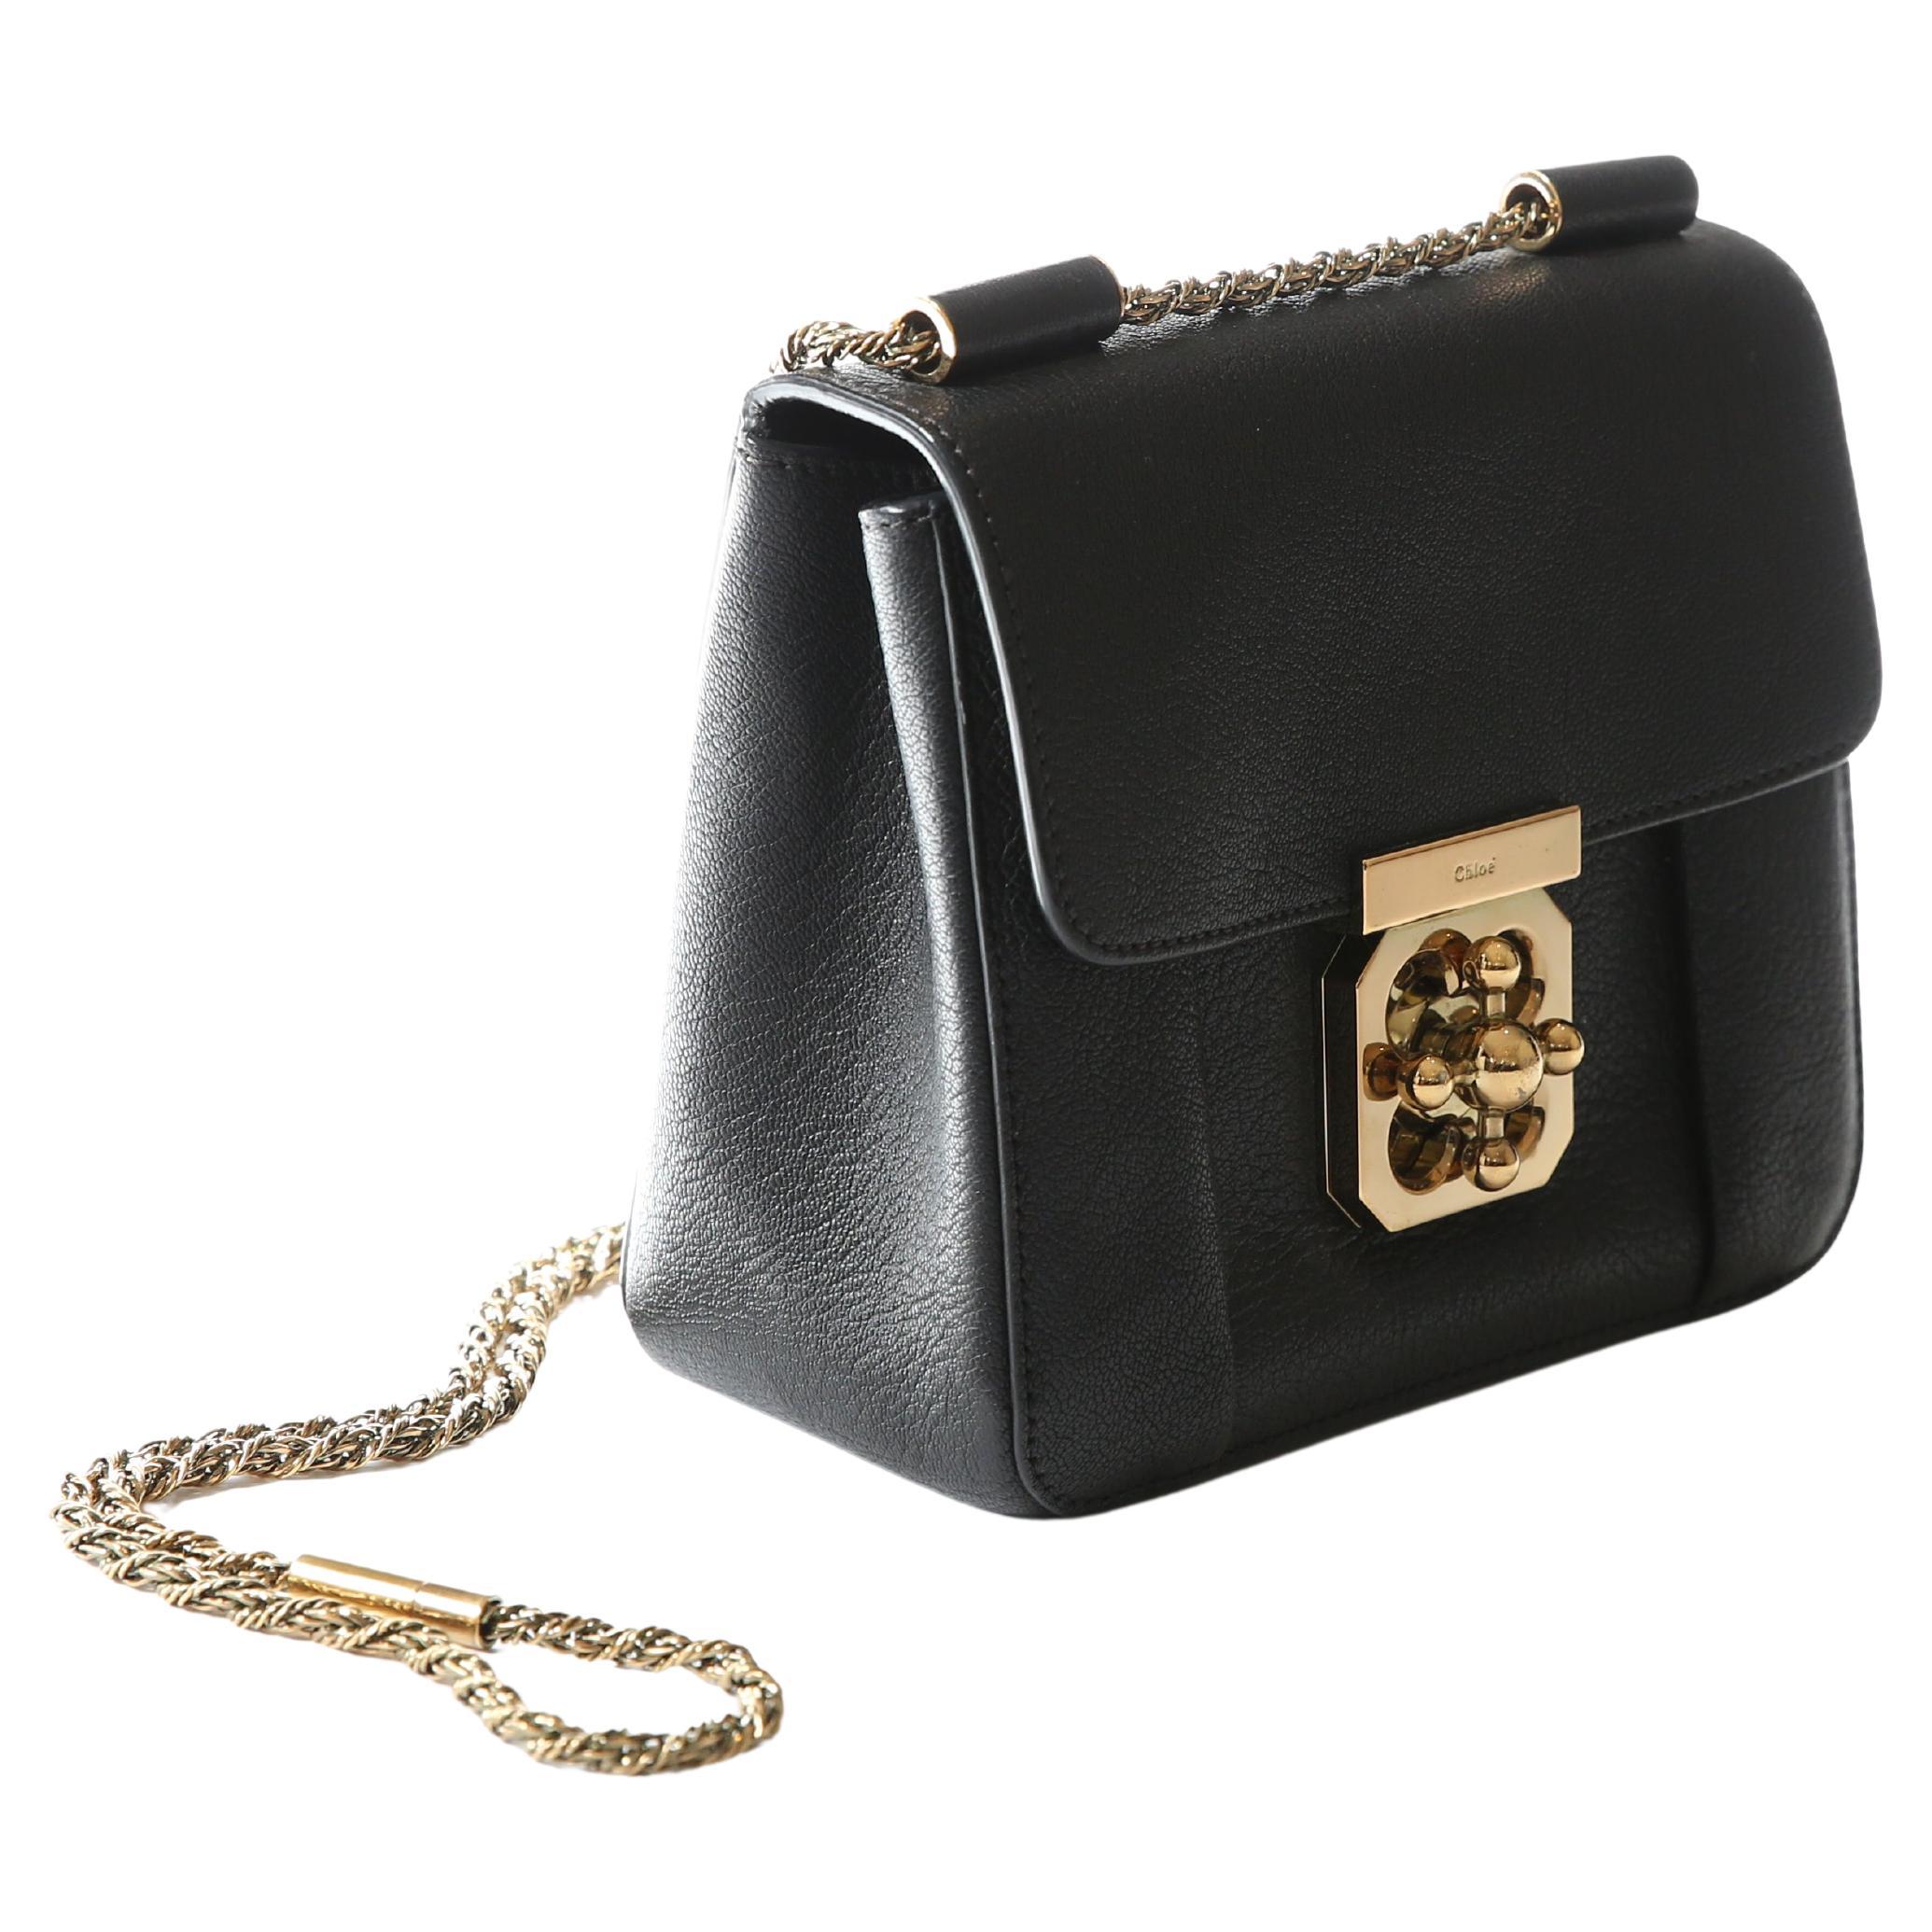 Chloe Elise black small gold chain grained leather shoulder bag clutch For Sale